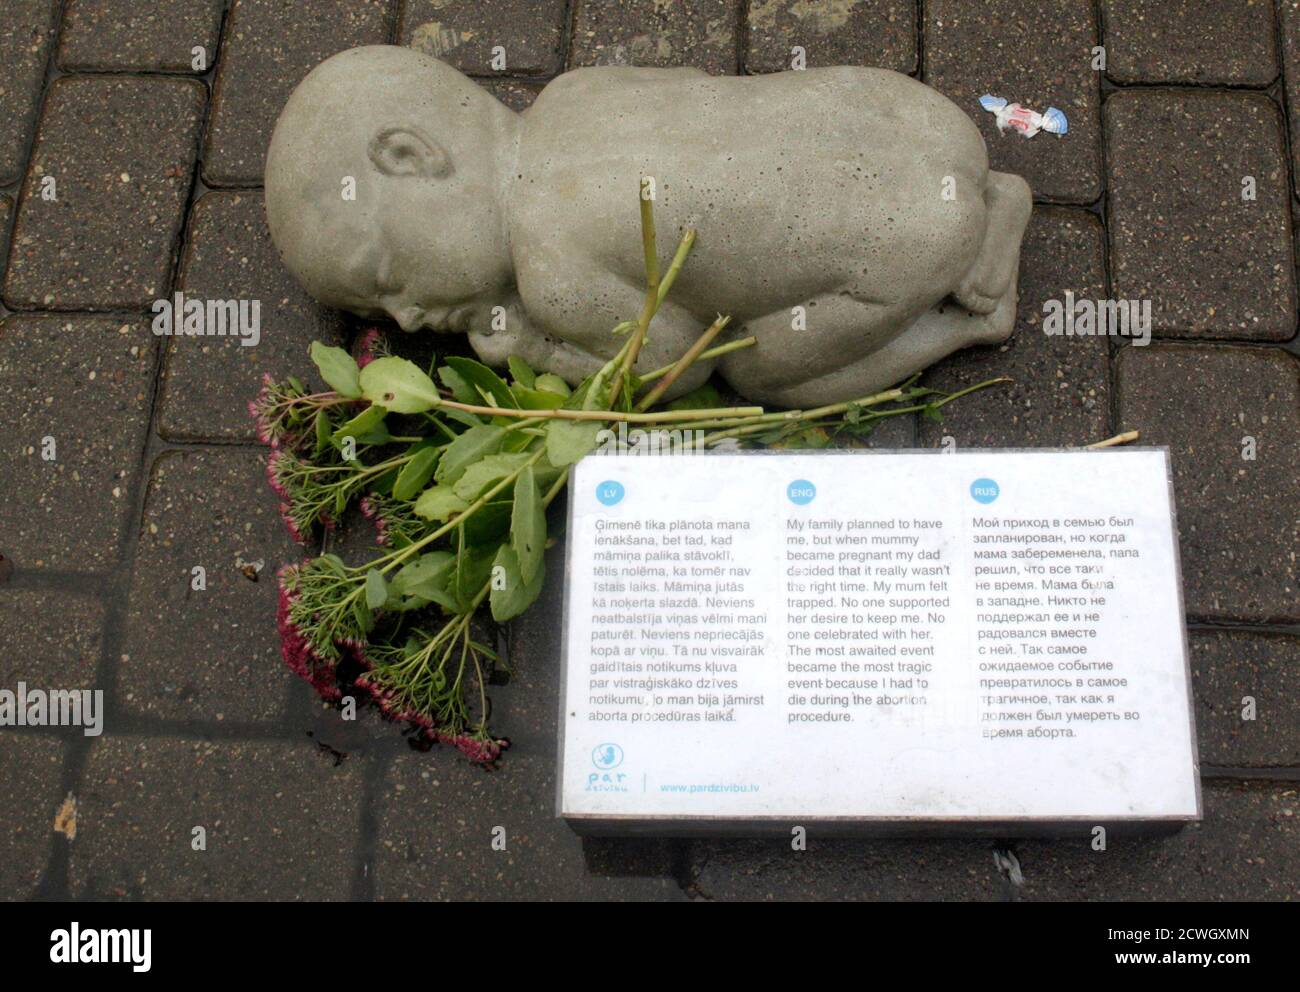 A sculpture and flowers are displayed during an anti-abortion campaign on the street in Riga October 11, 2012. Several non-governmental organisations and conservative politicians started an anti-abortion campaign to solve a problem of the Latvia's aging society, according to local media. REUTERS/Ints Kalnins (LATVIA - Tags: HEALTH SOCIETY) Stock Photo